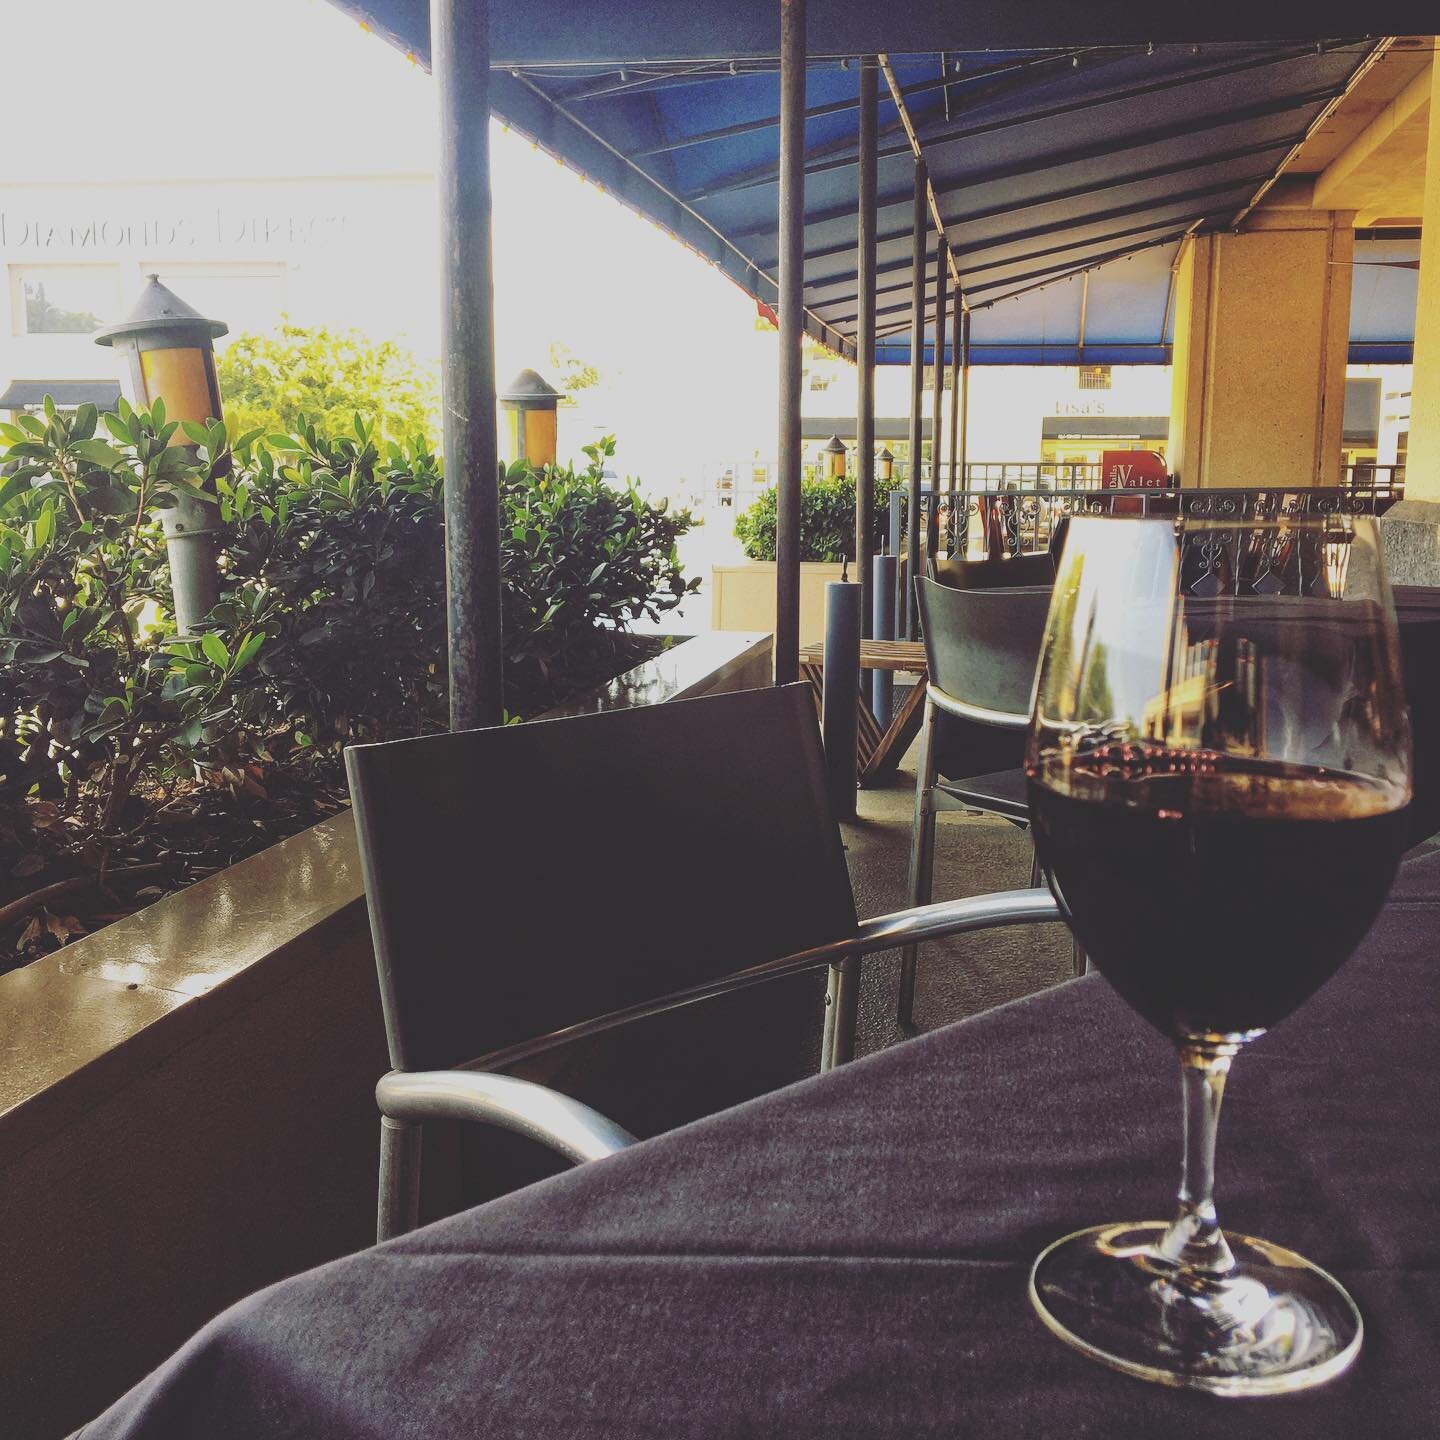 81 degrees on the patio with a nice little breeze... add in a few friends and some Cabernet and you&rsquo;re living right!

We&rsquo;ve added additional patio space on the front and side of the restaurant so everyone can enjoy this wonderful weather 